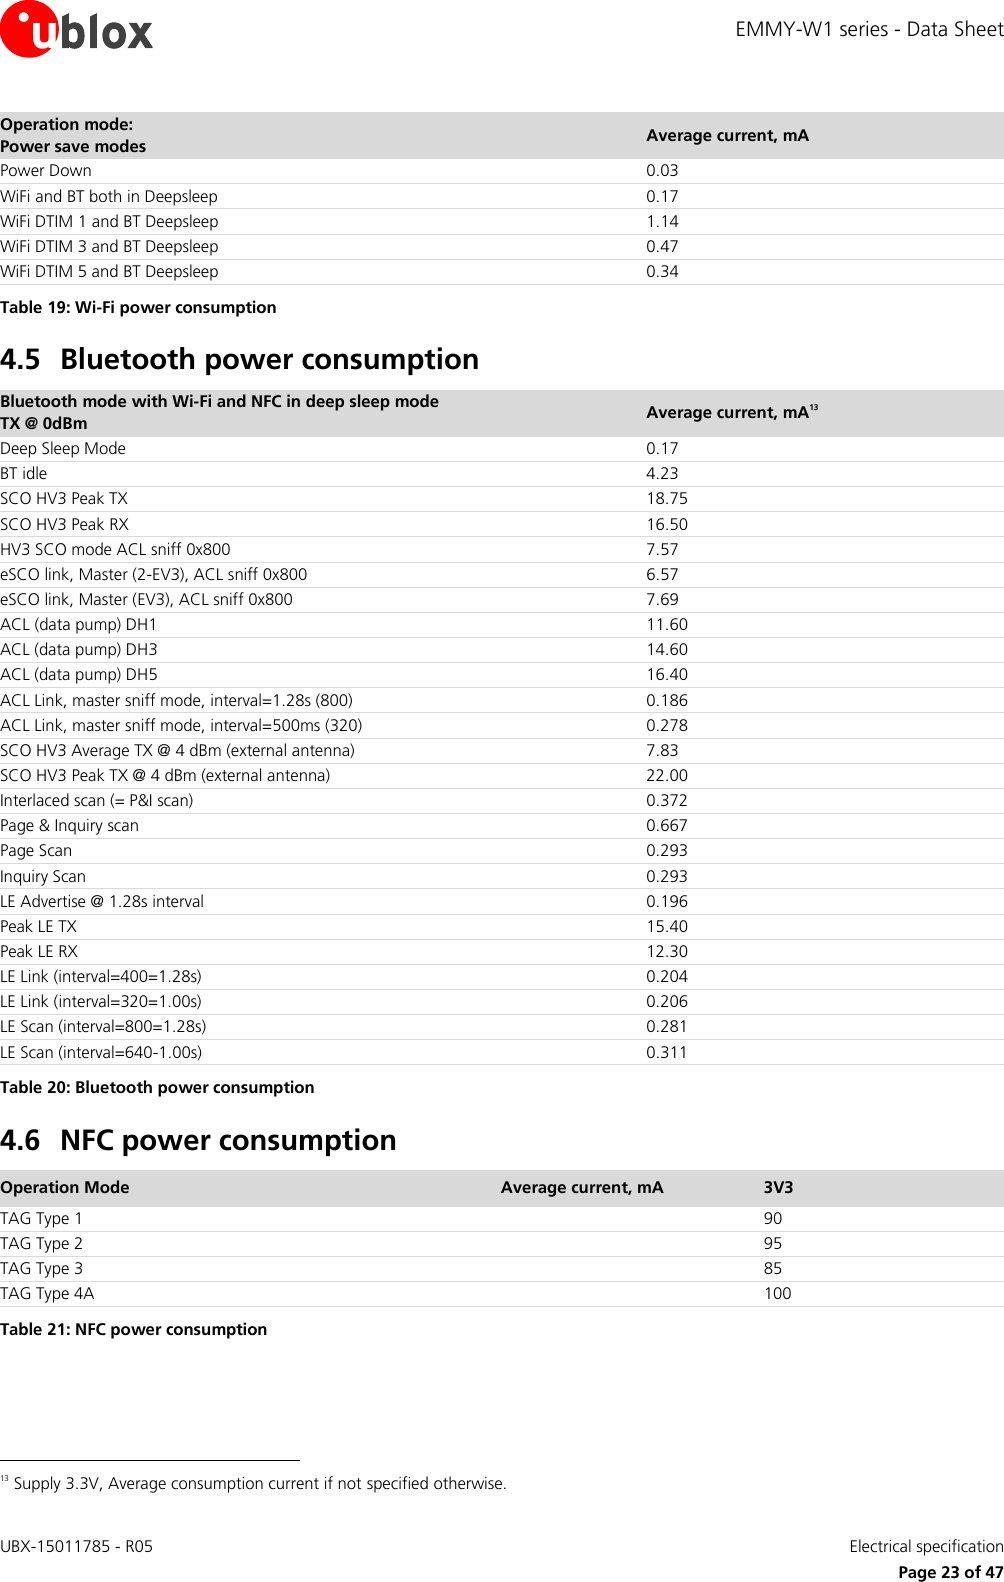 EMMY-W1 series - Data Sheet UBX-15011785 - R05   Electrical specification     Page 23 of 47 Operation mode:  Power save modes Average current, mA Power Down 0.03 WiFi and BT both in Deepsleep 0.17 WiFi DTIM 1 and BT Deepsleep 1.14 WiFi DTIM 3 and BT Deepsleep 0.47 WiFi DTIM 5 and BT Deepsleep 0.34 Table 19: Wi-Fi power consumption 4.5 Bluetooth power consumption Bluetooth mode with Wi-Fi and NFC in deep sleep mode TX @ 0dBm Average current, mA13 Deep Sleep Mode 0.17 BT idle 4.23 SCO HV3 Peak TX 18.75 SCO HV3 Peak RX 16.50 HV3 SCO mode ACL sniff 0x800 7.57 eSCO link, Master (2-EV3), ACL sniff 0x800 6.57 eSCO link, Master (EV3), ACL sniff 0x800 7.69 ACL (data pump) DH1 11.60 ACL (data pump) DH3 14.60 ACL (data pump) DH5 16.40 ACL Link, master sniff mode, interval=1.28s (800) 0.186 ACL Link, master sniff mode, interval=500ms (320) 0.278 SCO HV3 Average TX @ 4 dBm (external antenna) 7.83 SCO HV3 Peak TX @ 4 dBm (external antenna) 22.00 Interlaced scan (= P&amp;I scan) 0.372 Page &amp; Inquiry scan 0.667 Page Scan 0.293 Inquiry Scan 0.293 LE Advertise @ 1.28s interval 0.196 Peak LE TX 15.40 Peak LE RX 12.30 LE Link (interval=400=1.28s) 0.204 LE Link (interval=320=1.00s) 0.206 LE Scan (interval=800=1.28s) 0.281 LE Scan (interval=640-1.00s) 0.311 Table 20: Bluetooth power consumption 4.6 NFC power consumption Operation Mode Average current, mA  3V3 TAG Type 1    90 TAG Type 2    95 TAG Type 3    85 TAG Type 4A  100 Table 21: NFC power consumption                                                        13 Supply 3.3V, Average consumption current if not specified otherwise. 